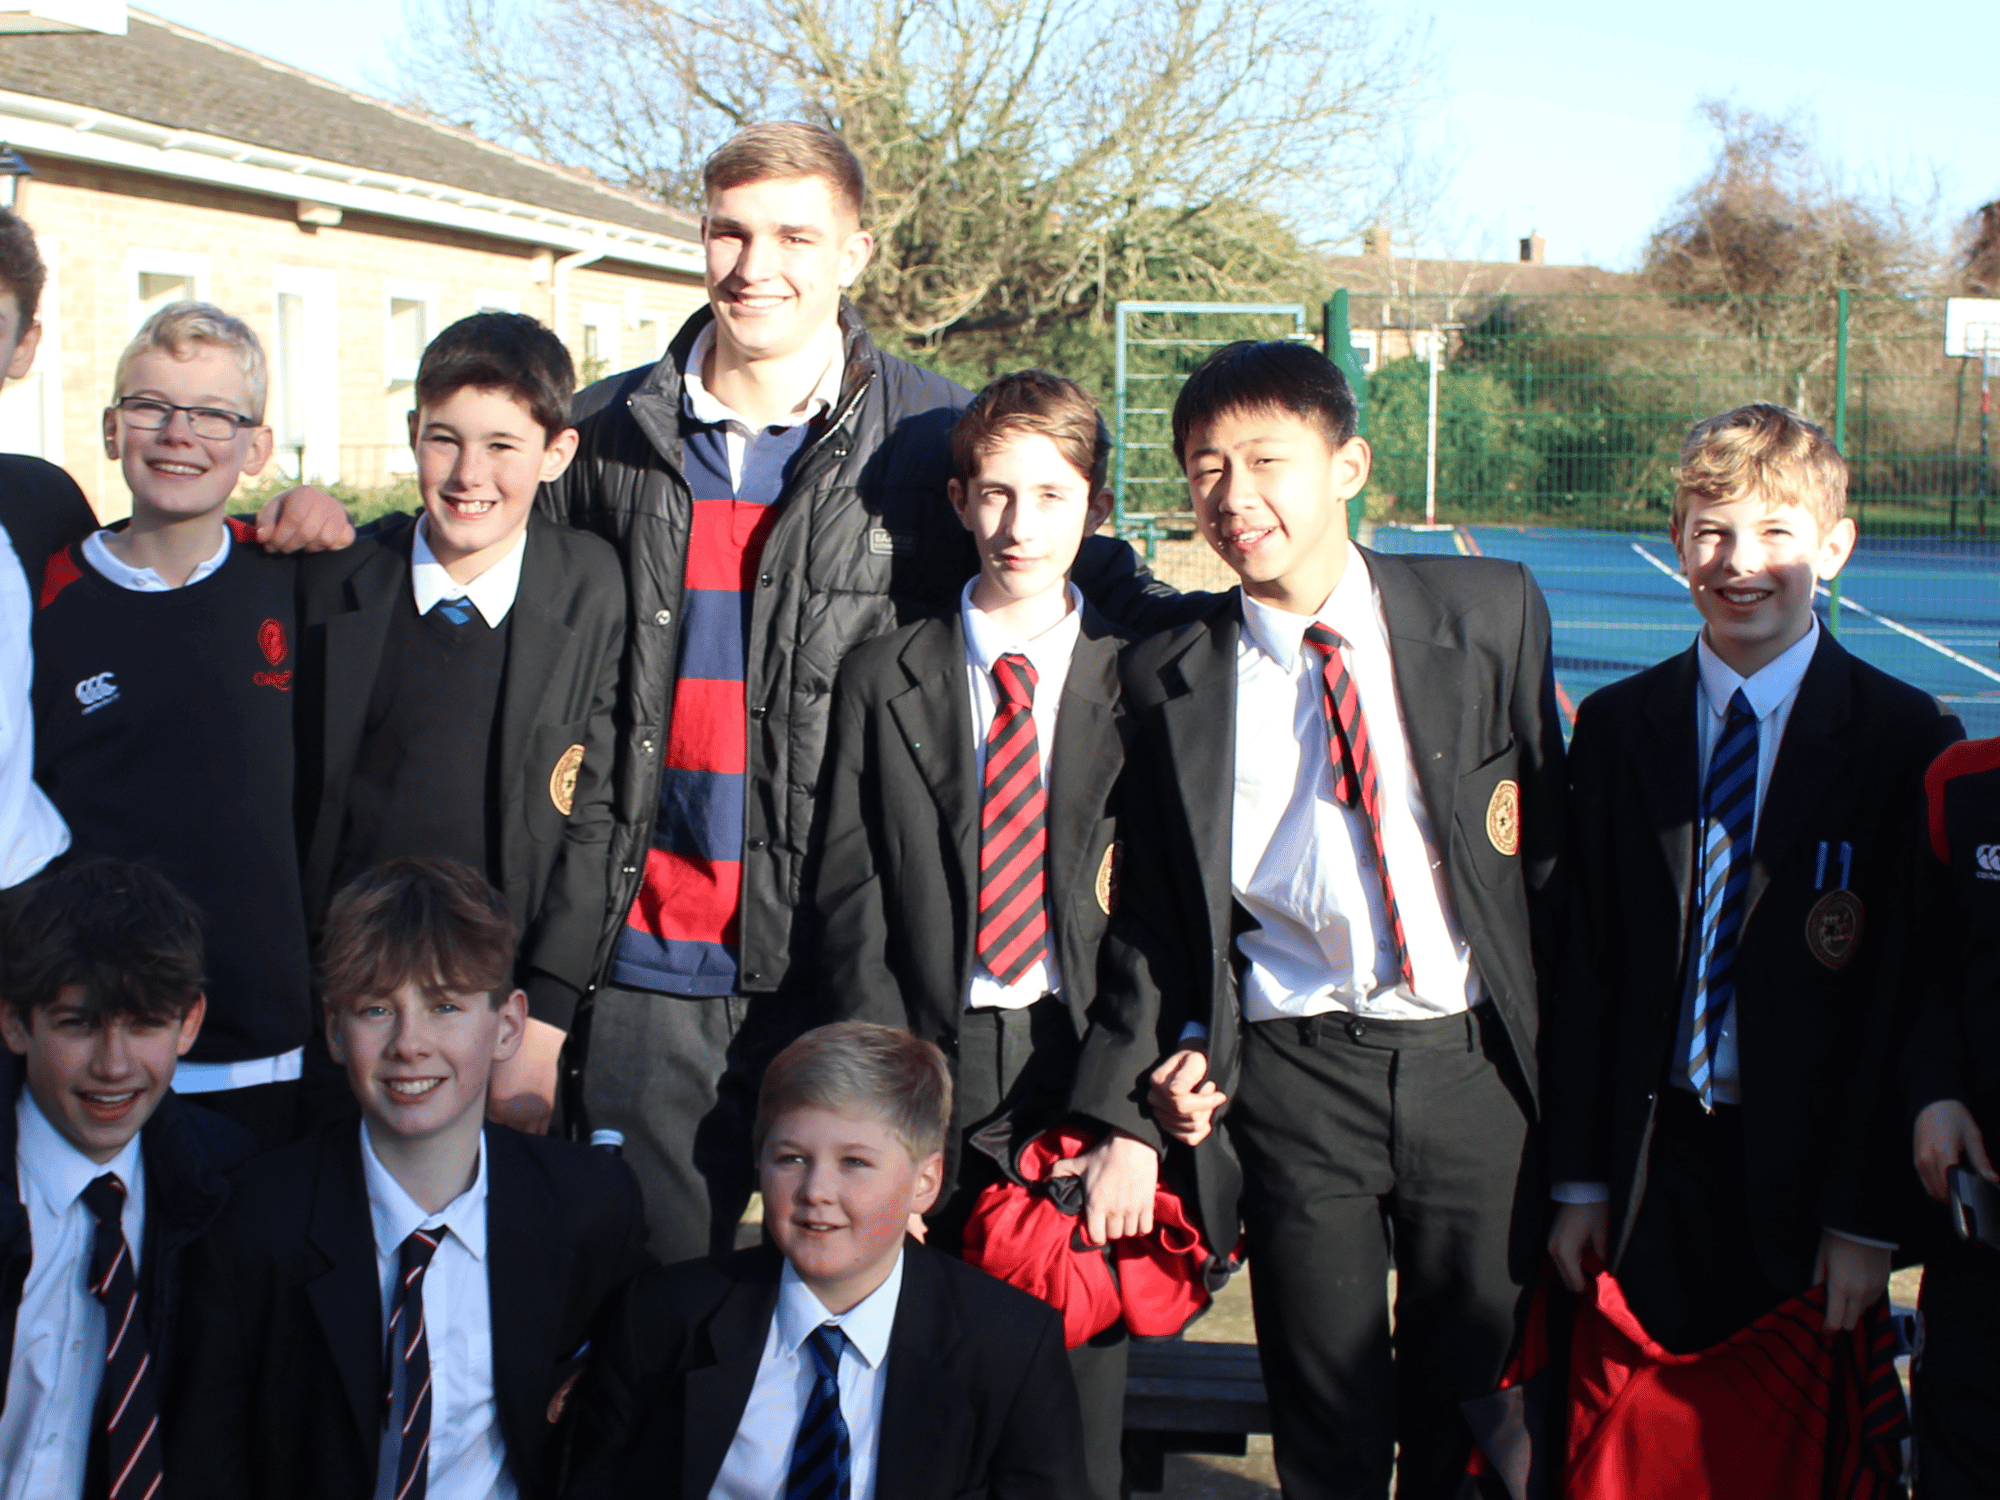 Pupils meeting rugby star